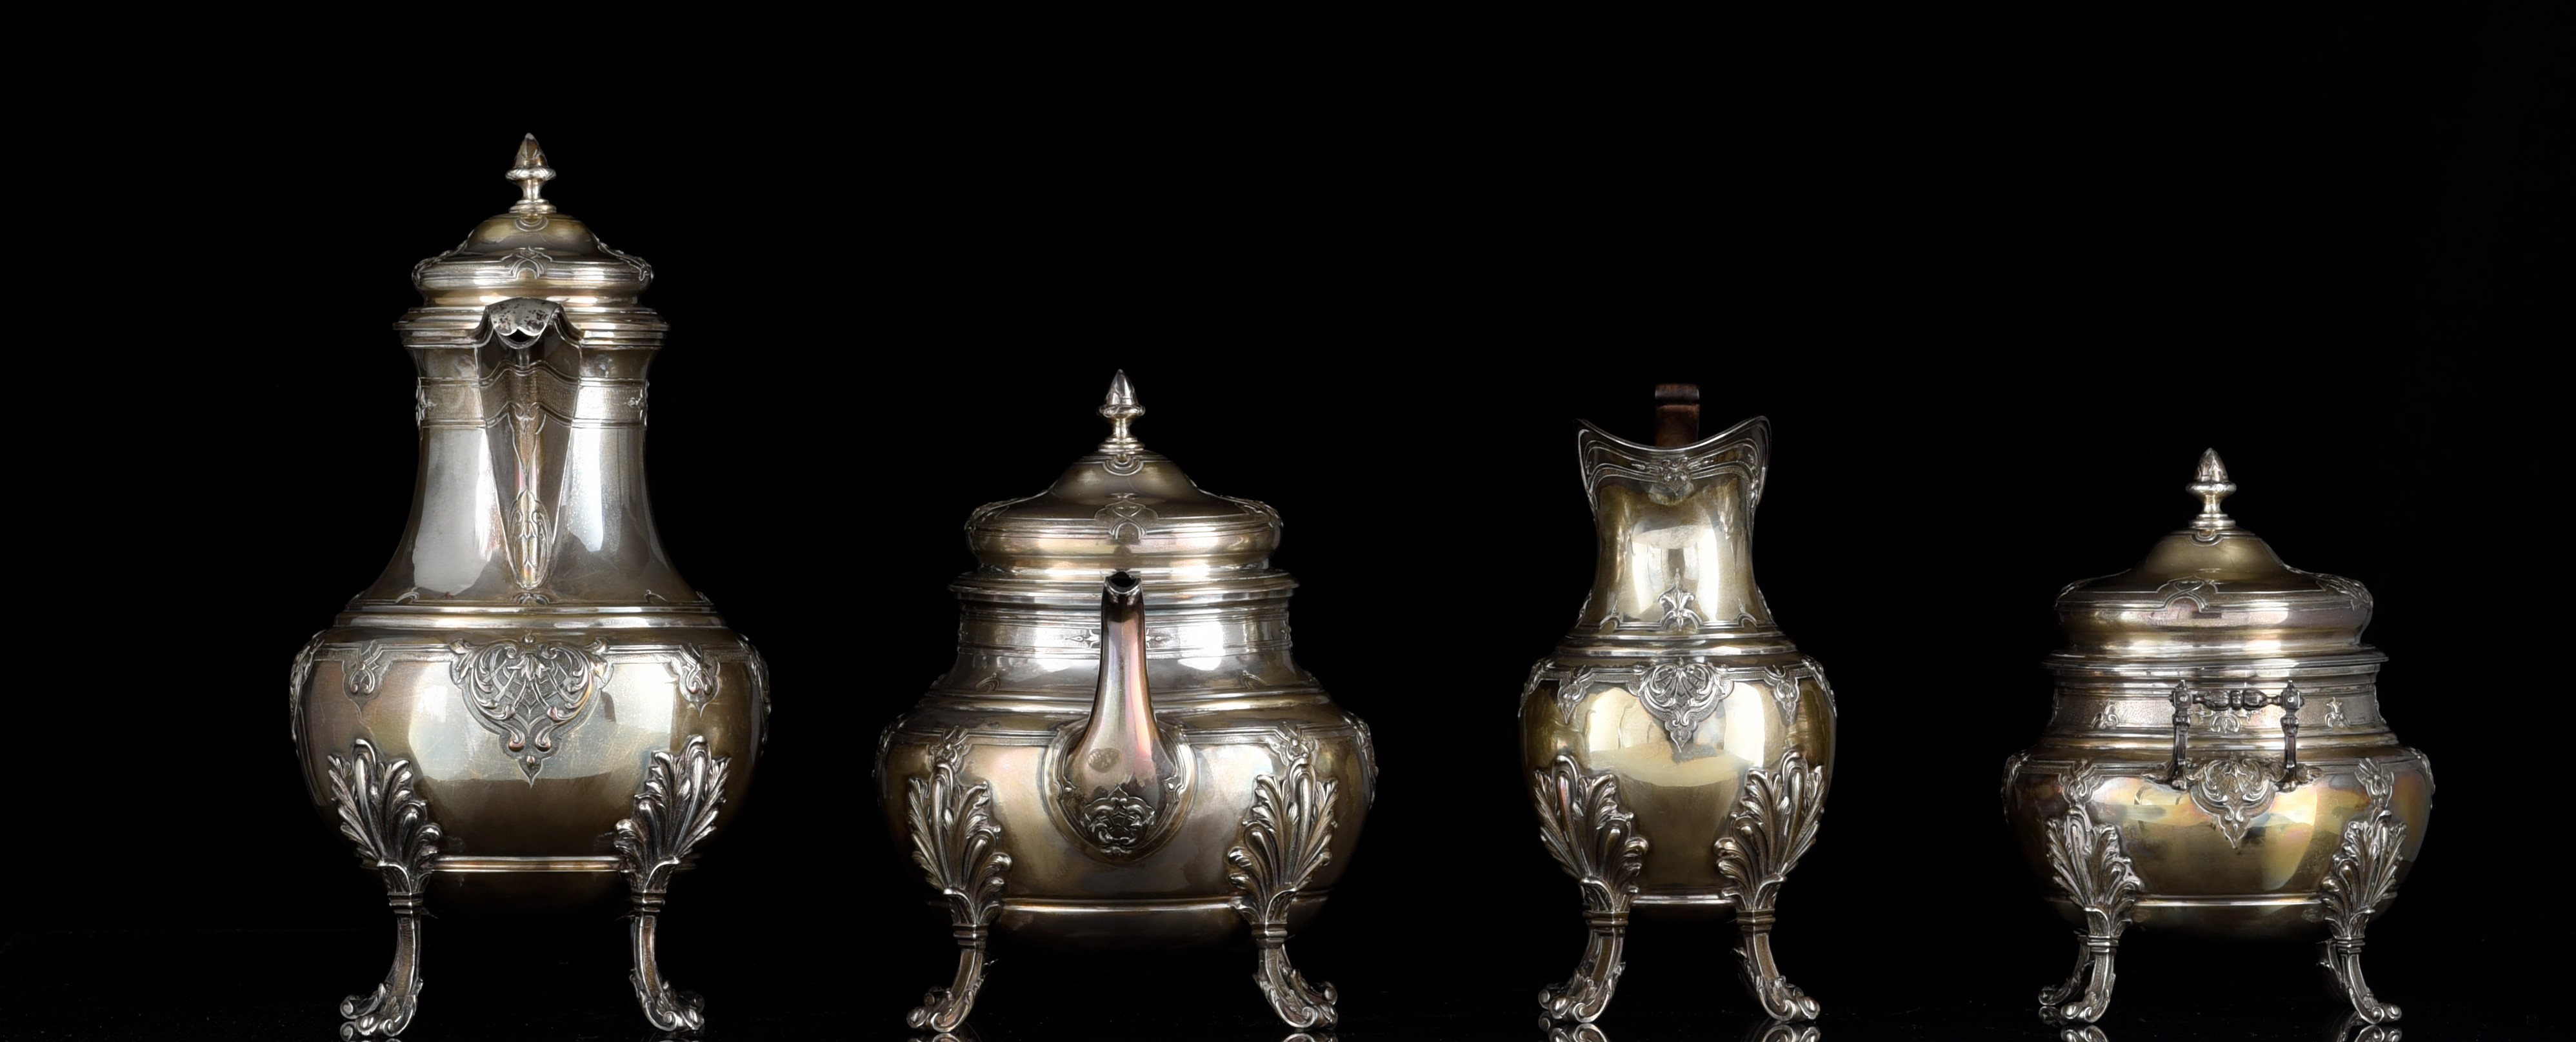 A French Régence style silver coffee and tea set, Georg Roth & Co, Hanau, late 19thC, H 18 - 29 cm - - Image 5 of 21